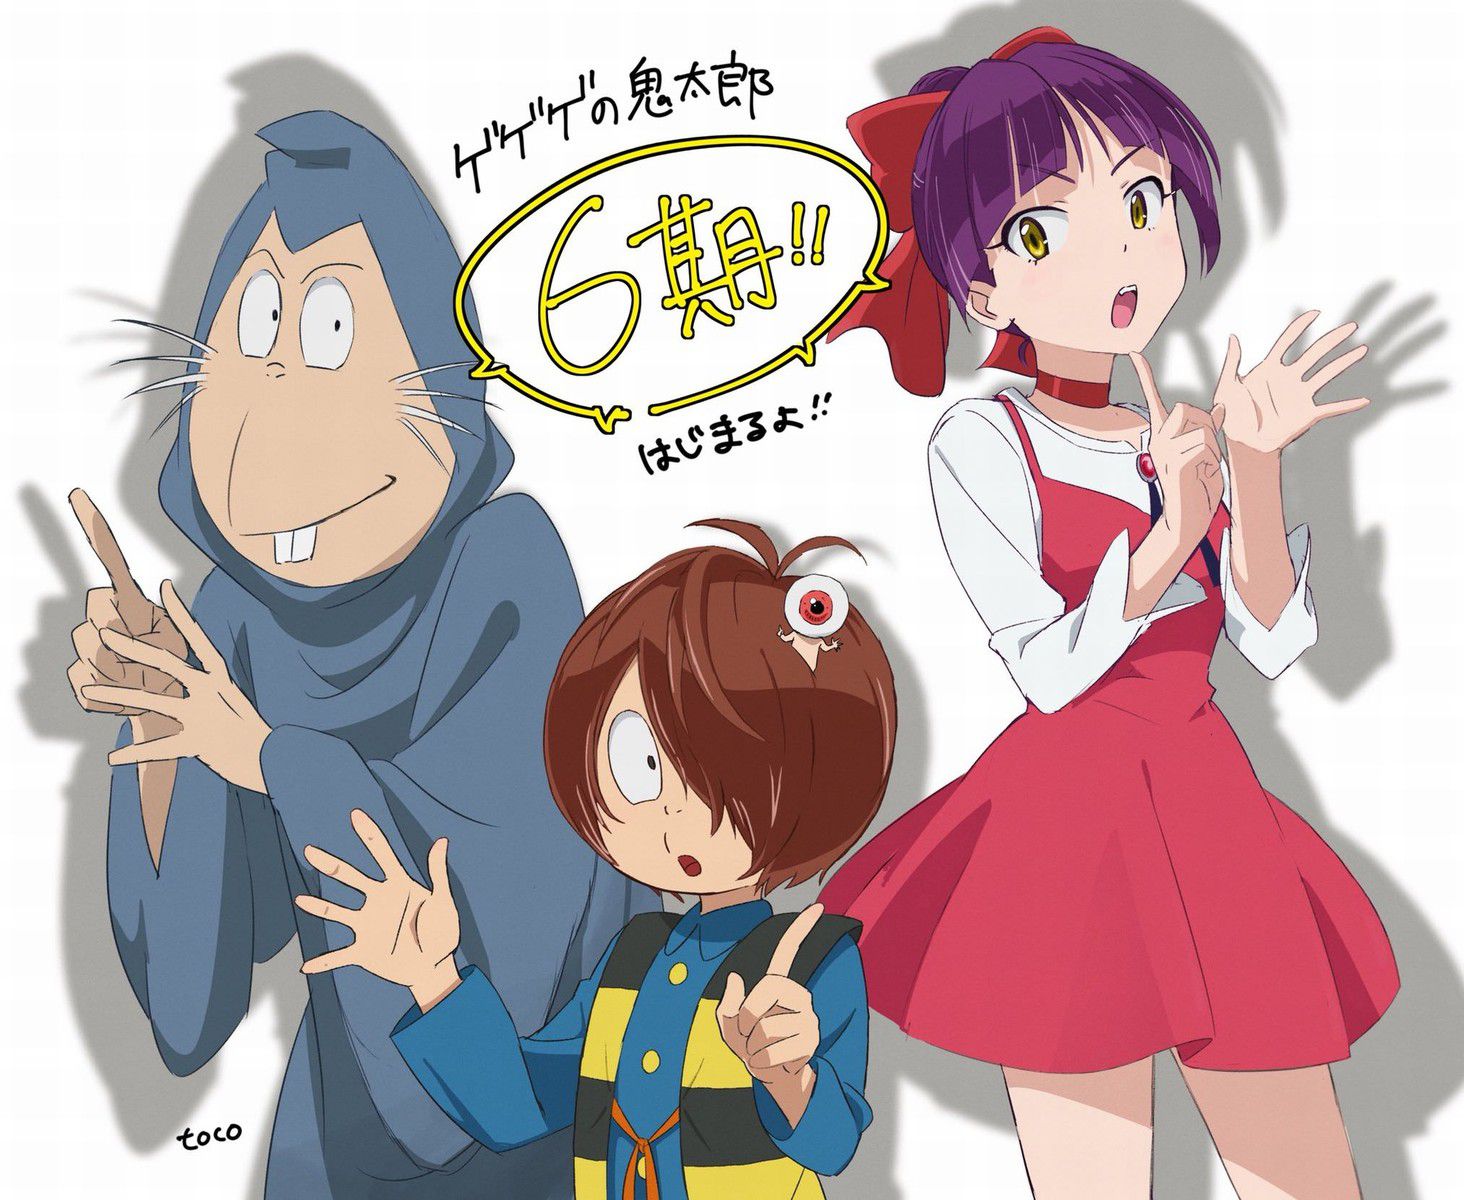 [Good news] anime "GeGeGe no Kitaro" new cat daughter, too much wwwwwwww 4